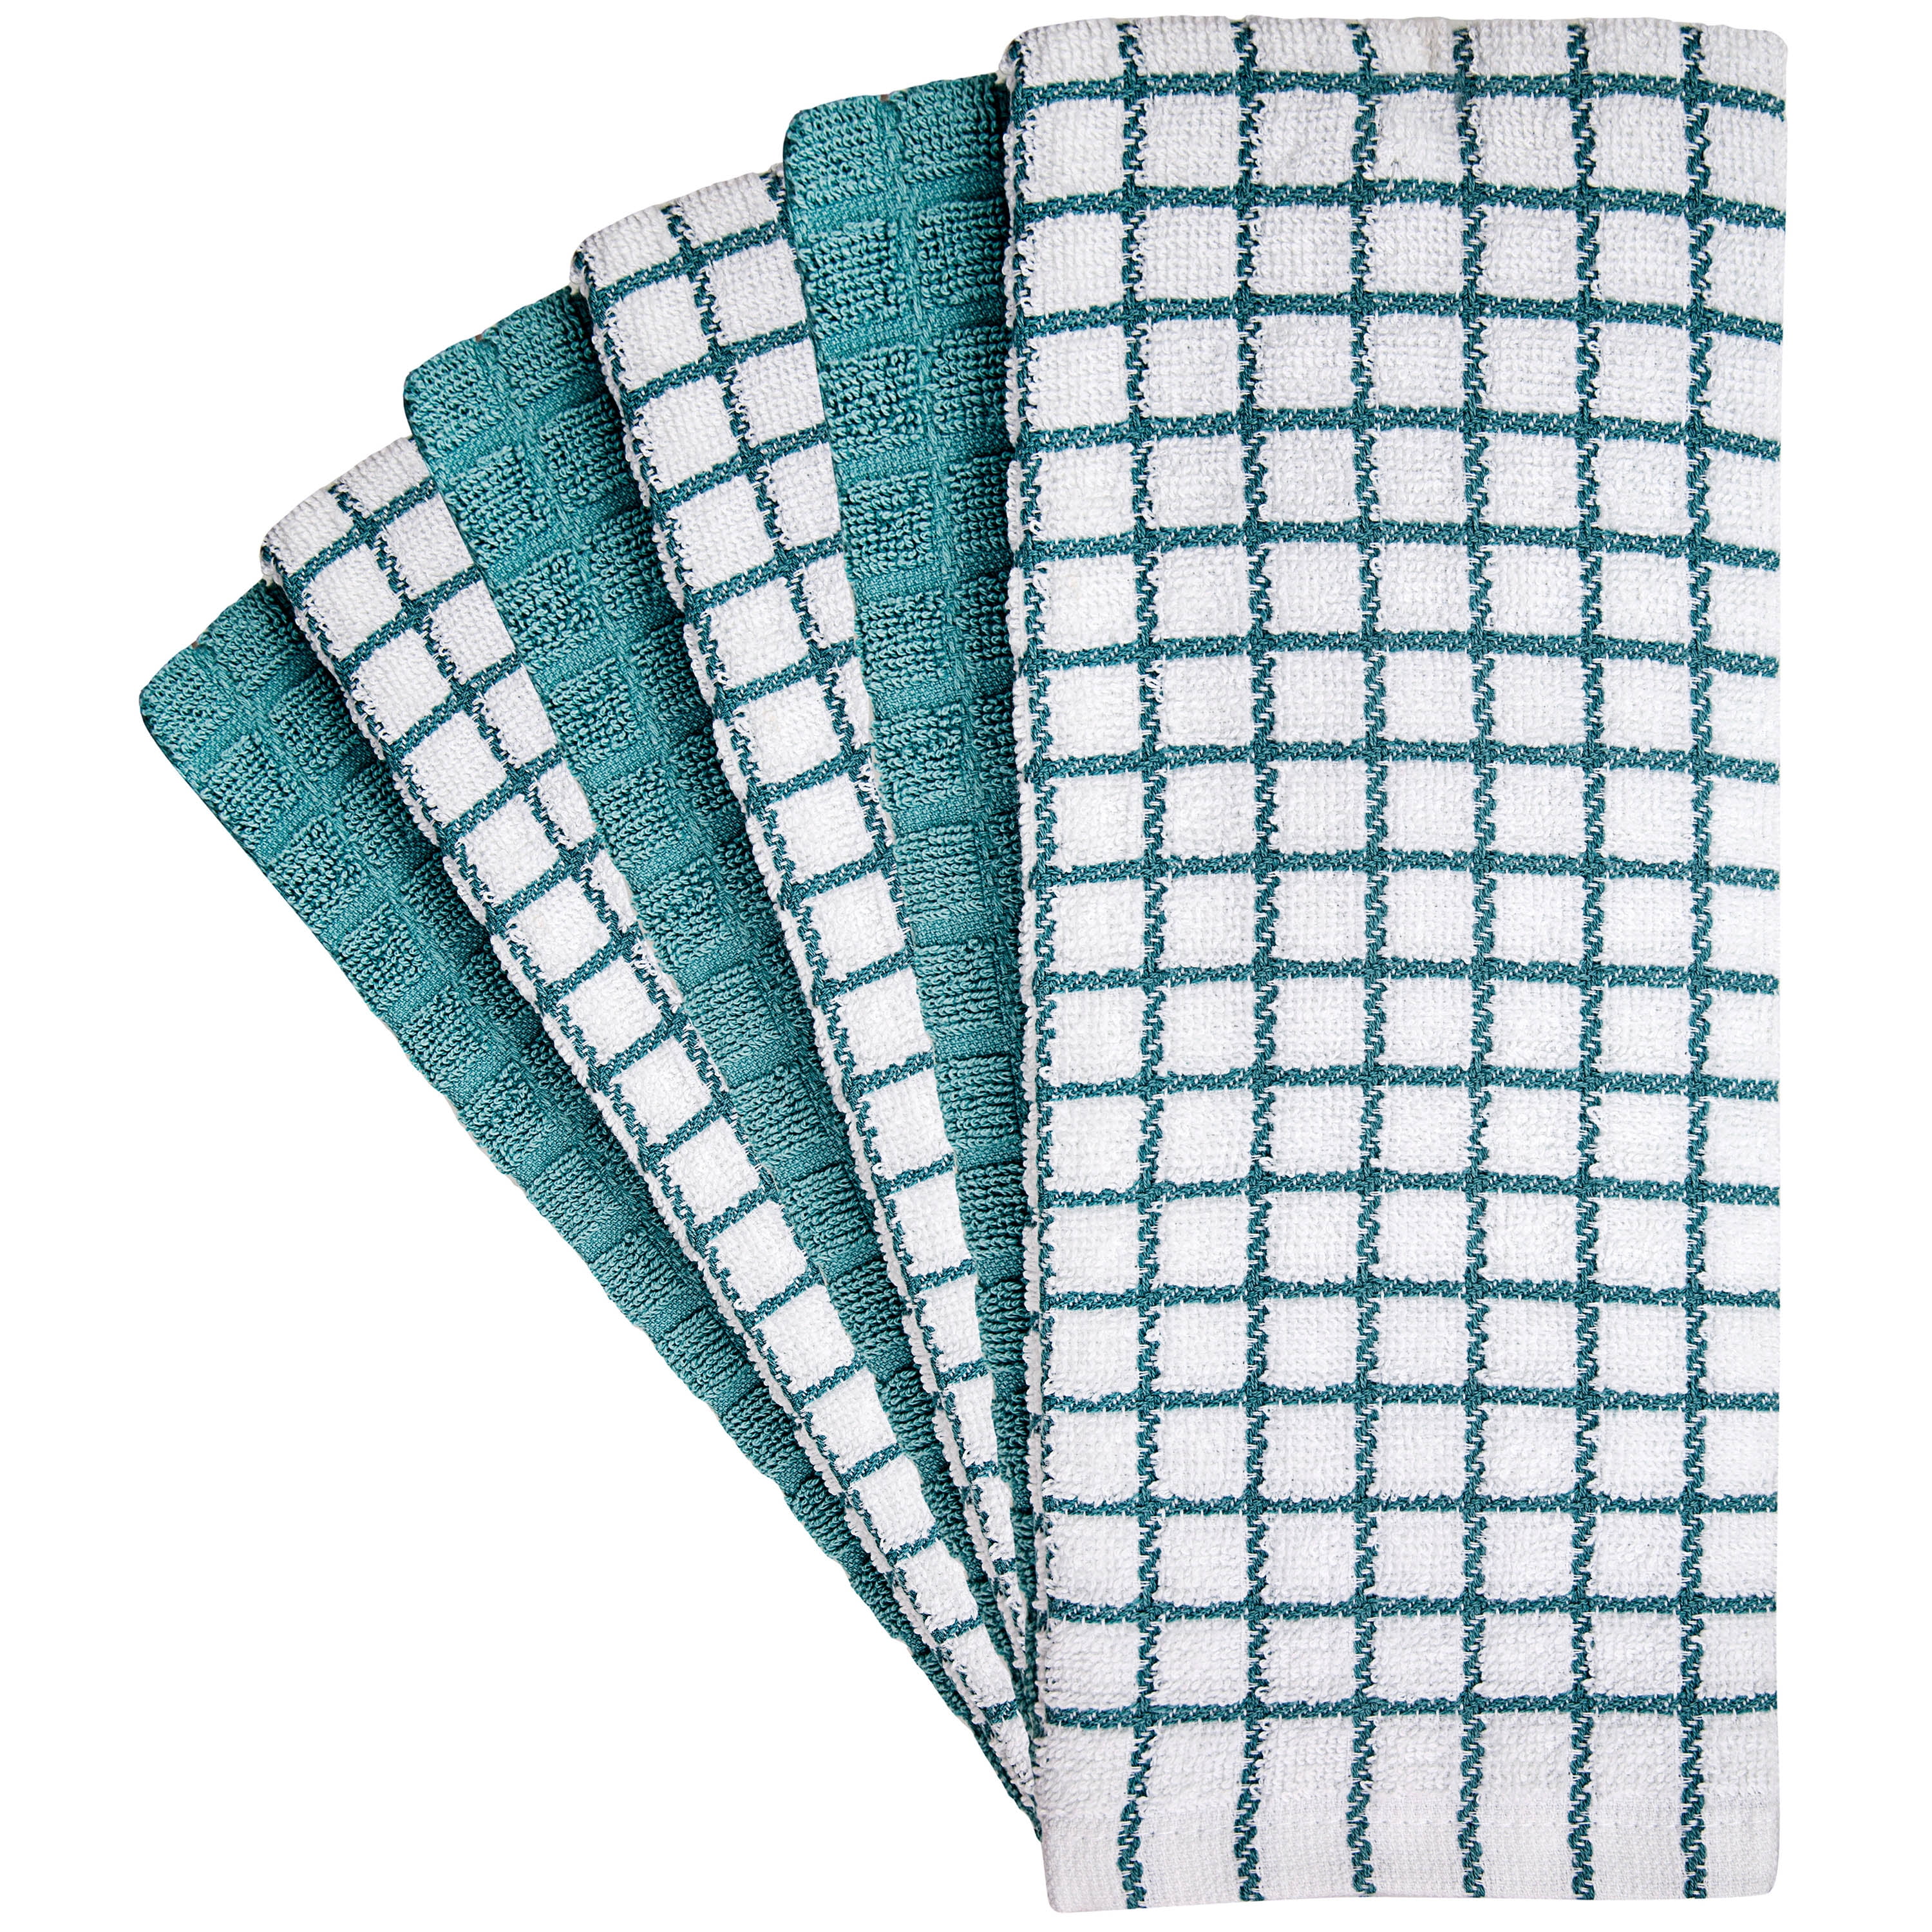 ERINA Premium Extra Large Kitchen Towels (16 x 28 Inch) - Popcorn Weave (12  Pack) Dish Towel Set 100% Combed Cotton Towels, Soft and Absorbent Tea